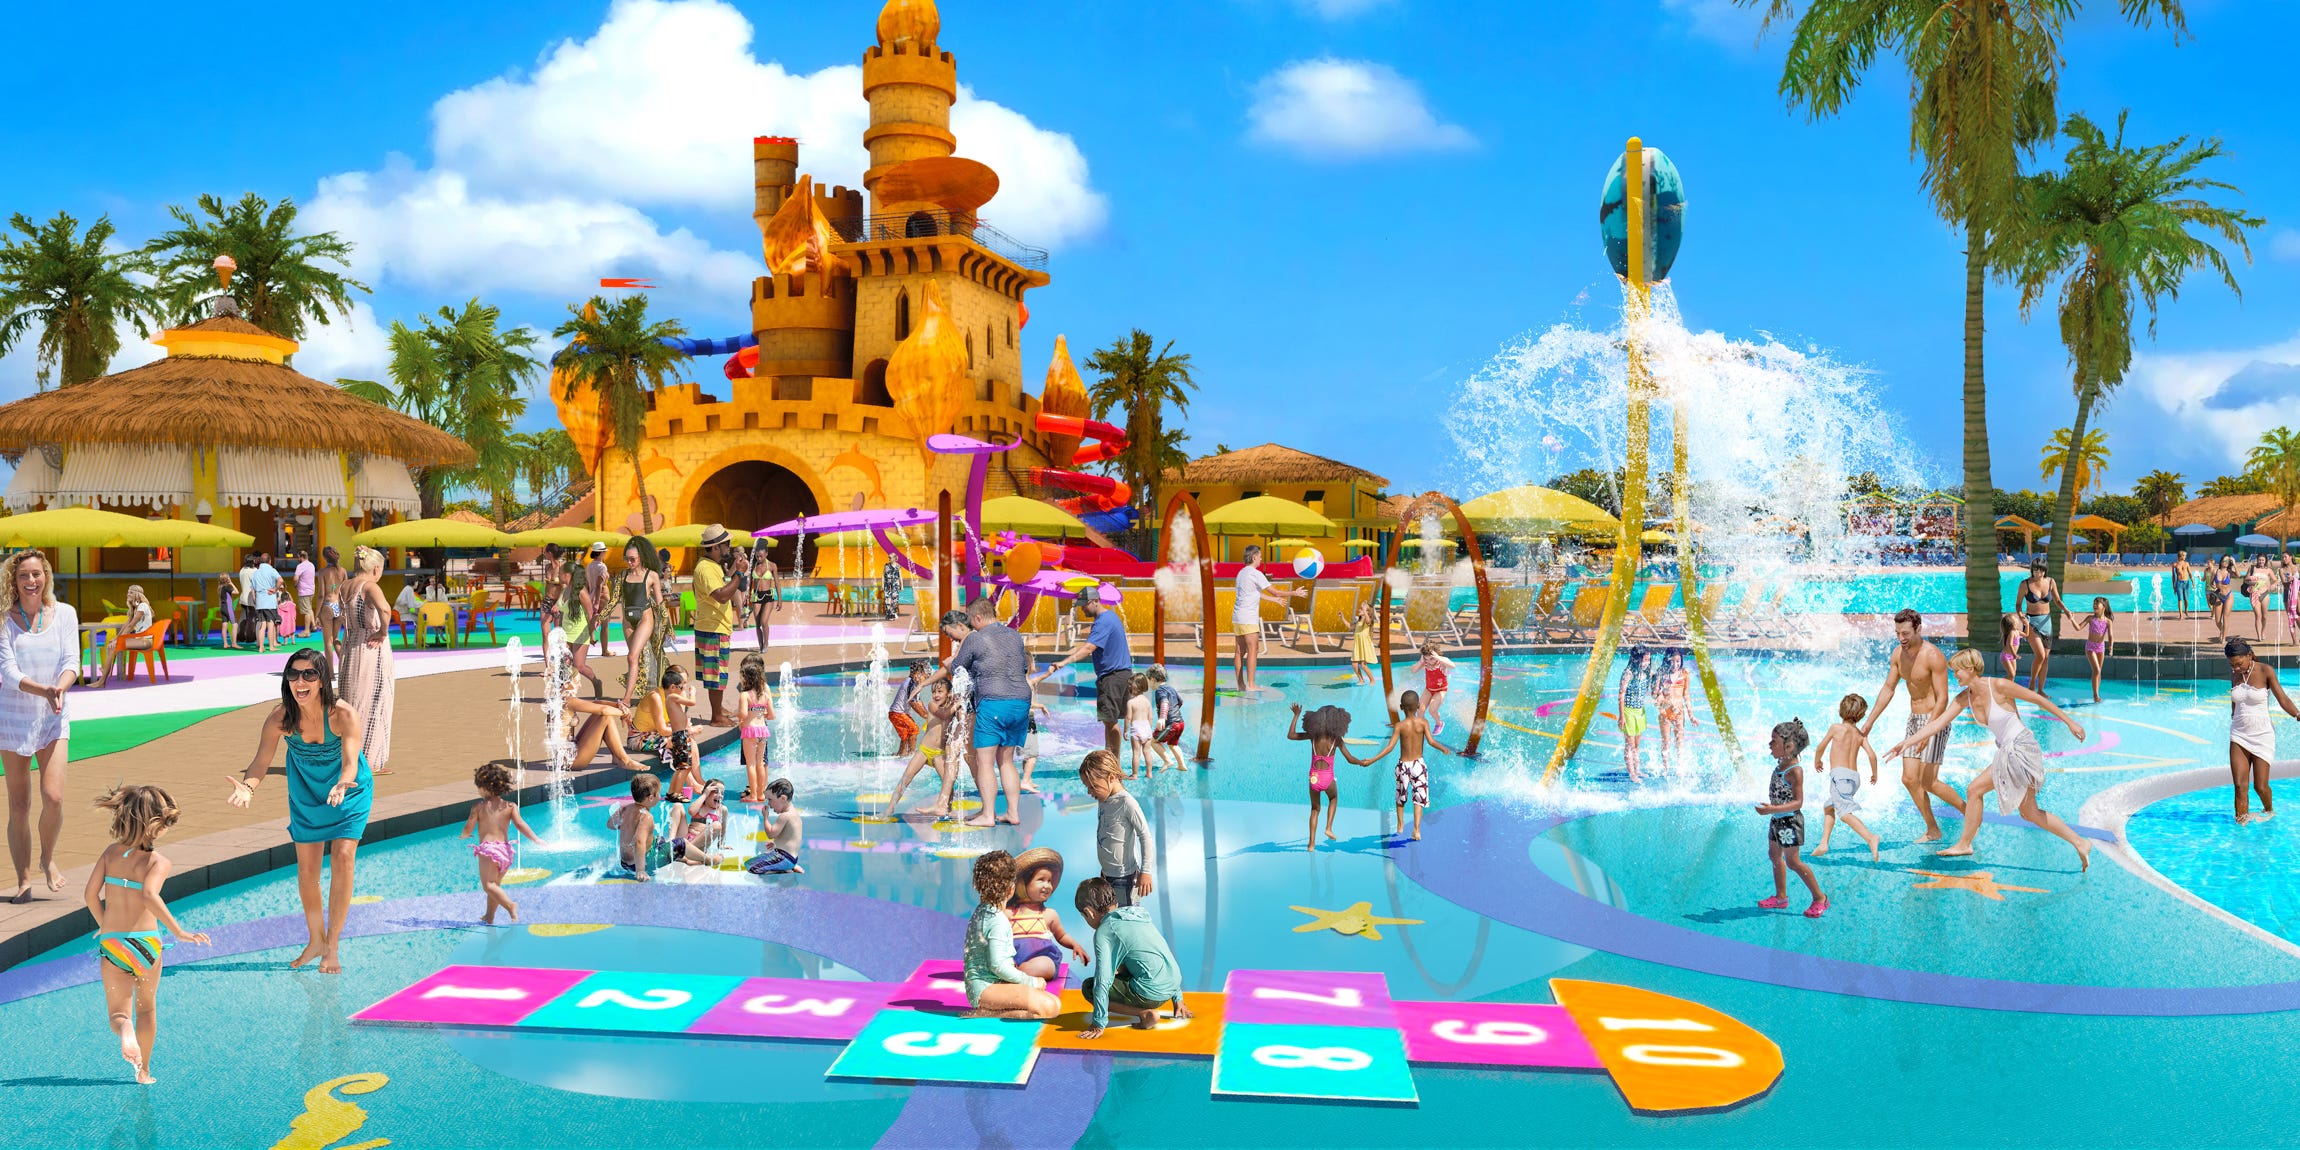 <p>Royal Caribbean's private island has a waterpark with 14 slides and children's play areas.</p><p>Similarly, according to Carnival's recent announcement, Celebration Key will have a large, family-friendly freshwater lagoon with two 350-foot-long waterslides and a children's water playground.</p><p>It's a scaled-back version of CocoCay's popular feature — for now. Looking ahead, Carnival <a href="https://www.carnival-news.com/2024/03/22/carnival-cruise-line-kicks-off-celebration-keyTM-portal-reveals-with-preview-of-paradise-plaza-and-calypso-lagoon">said</a> it plans to build a waterpark and zipline course, too.</p>